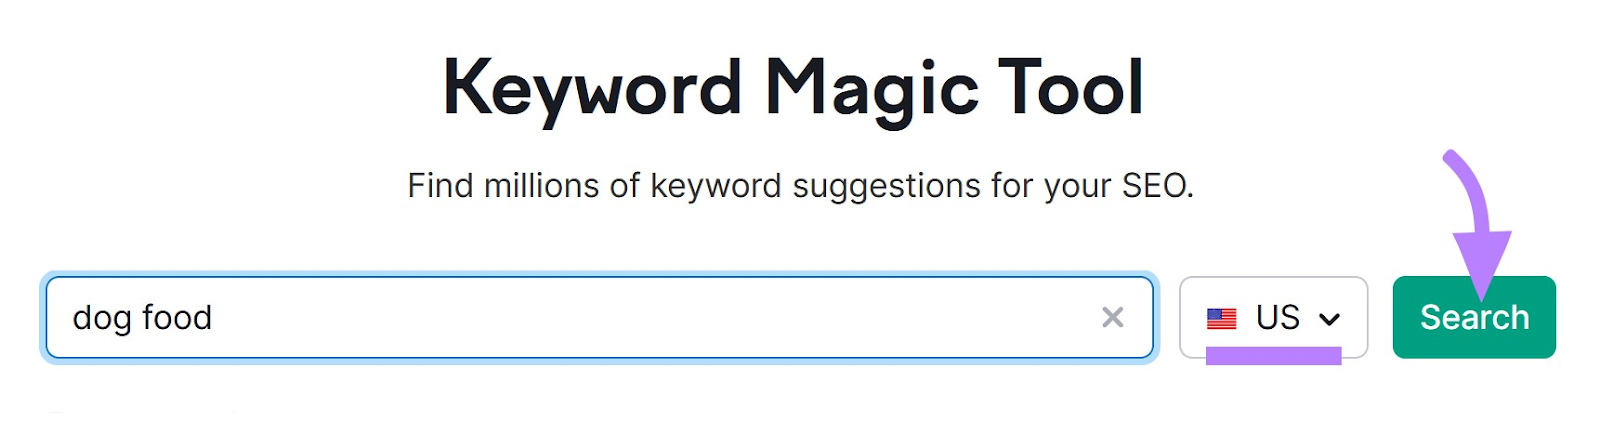 search for “dog food” in the US in Keyword Magic Tool